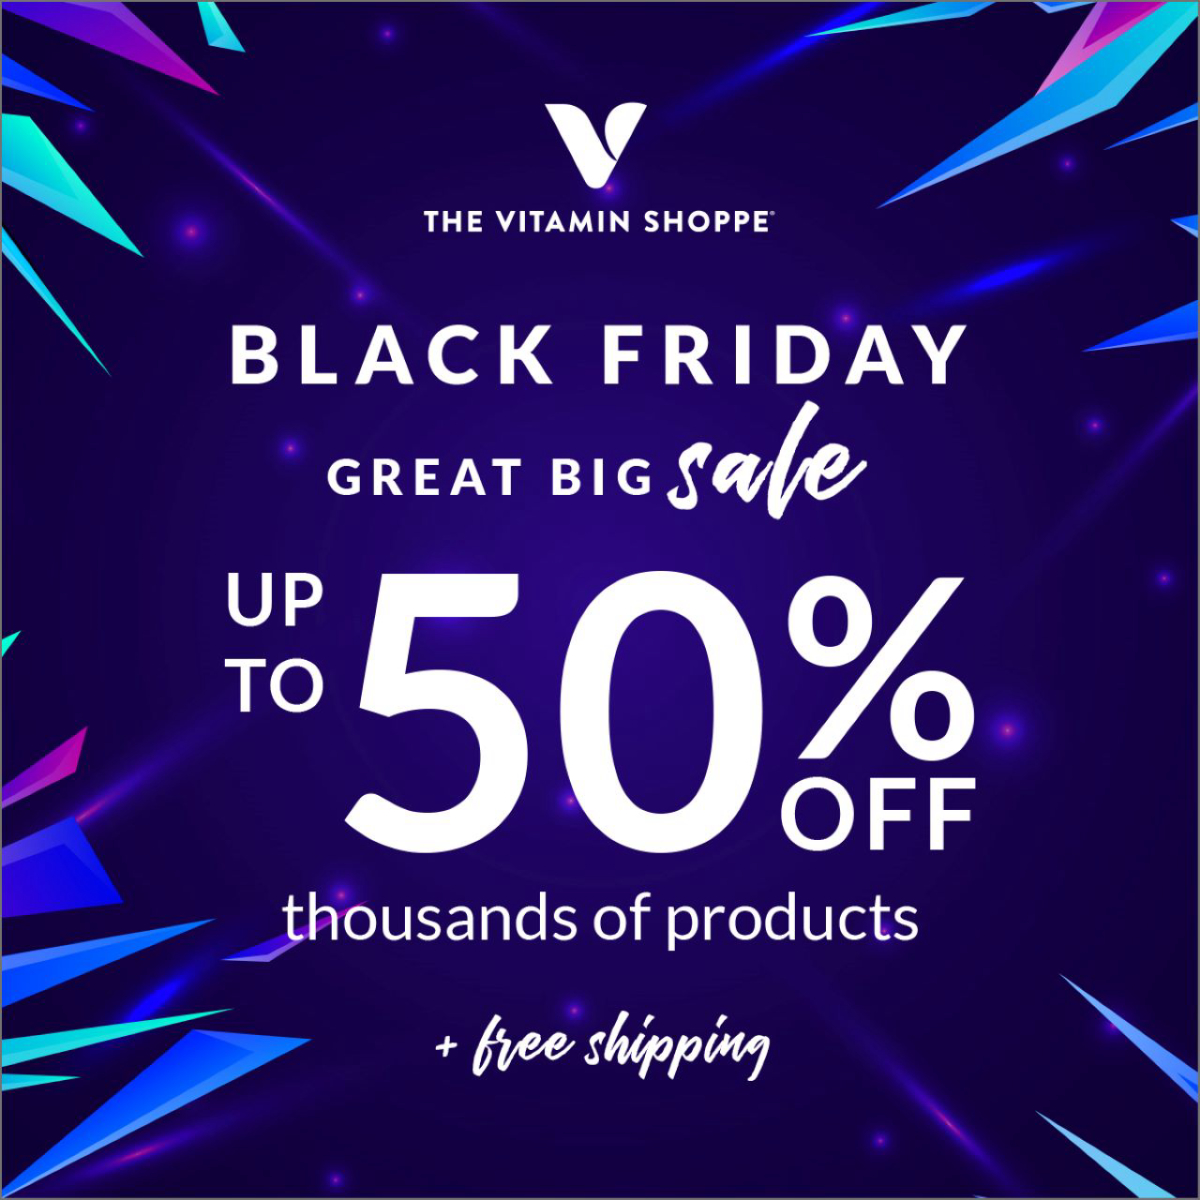 Black Friday - Great Big Sale from The Vitamin Shoppe                      